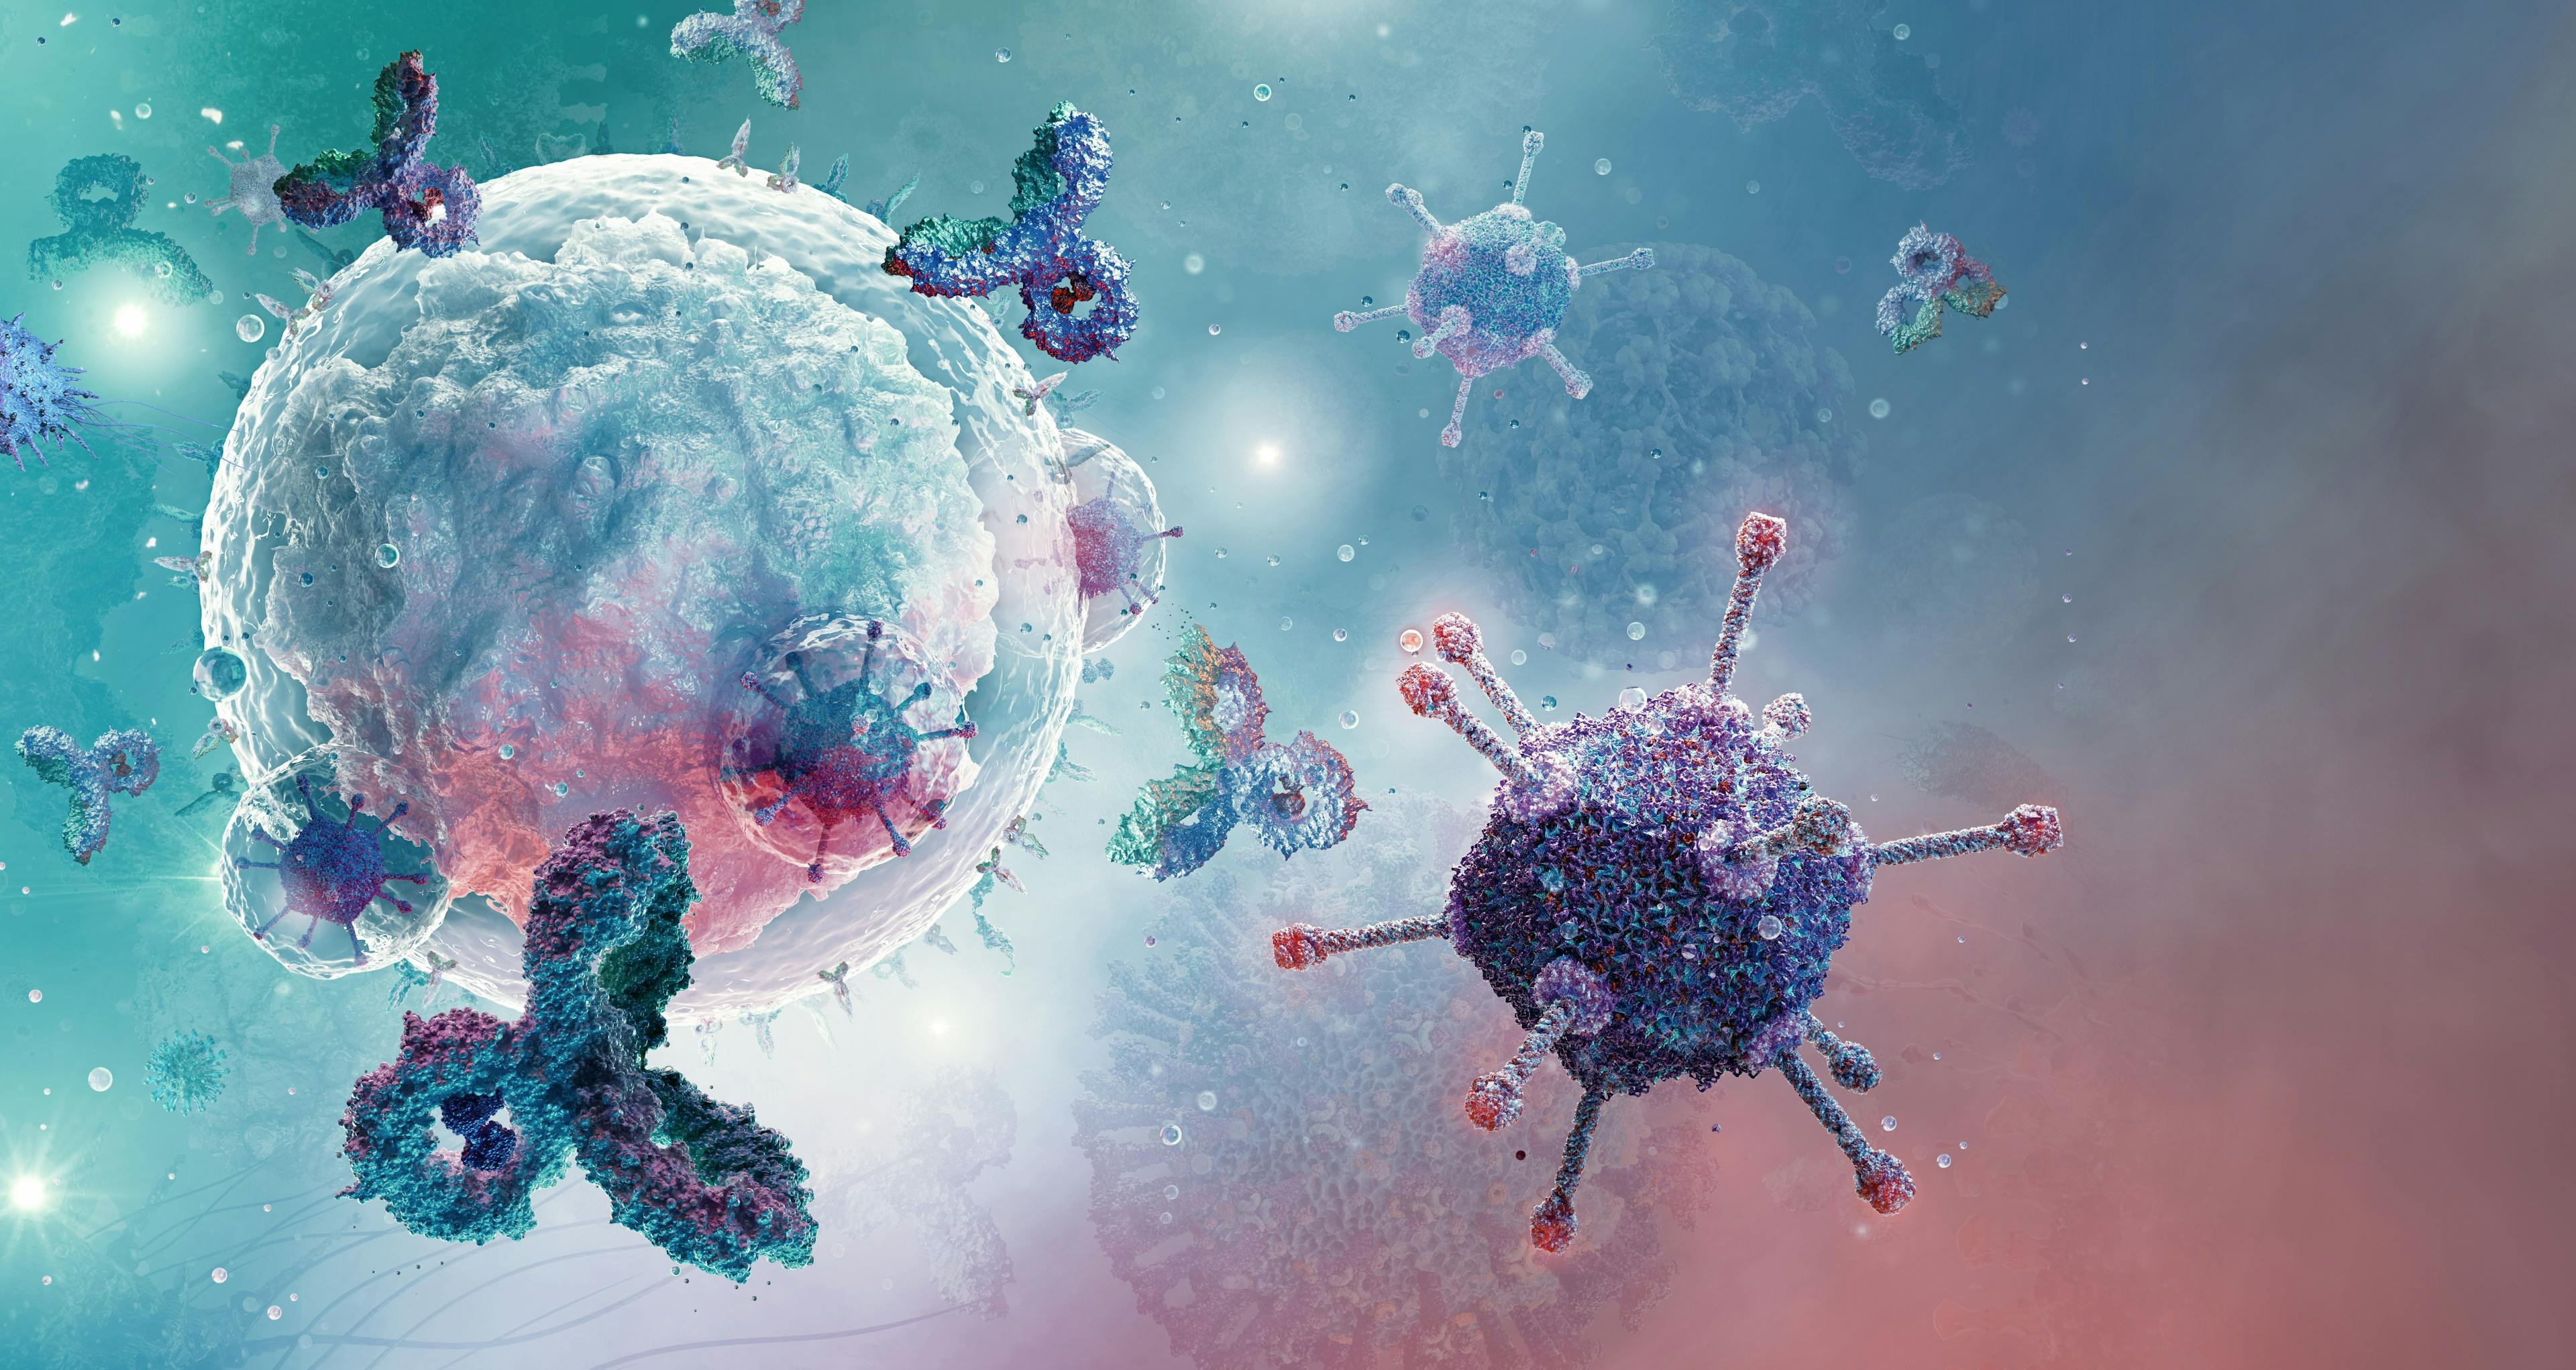 The Future of Immunotherapy in Breast Cancer Involves Engineered T-Cell Therapies, Better Prediction of Adverse Effects